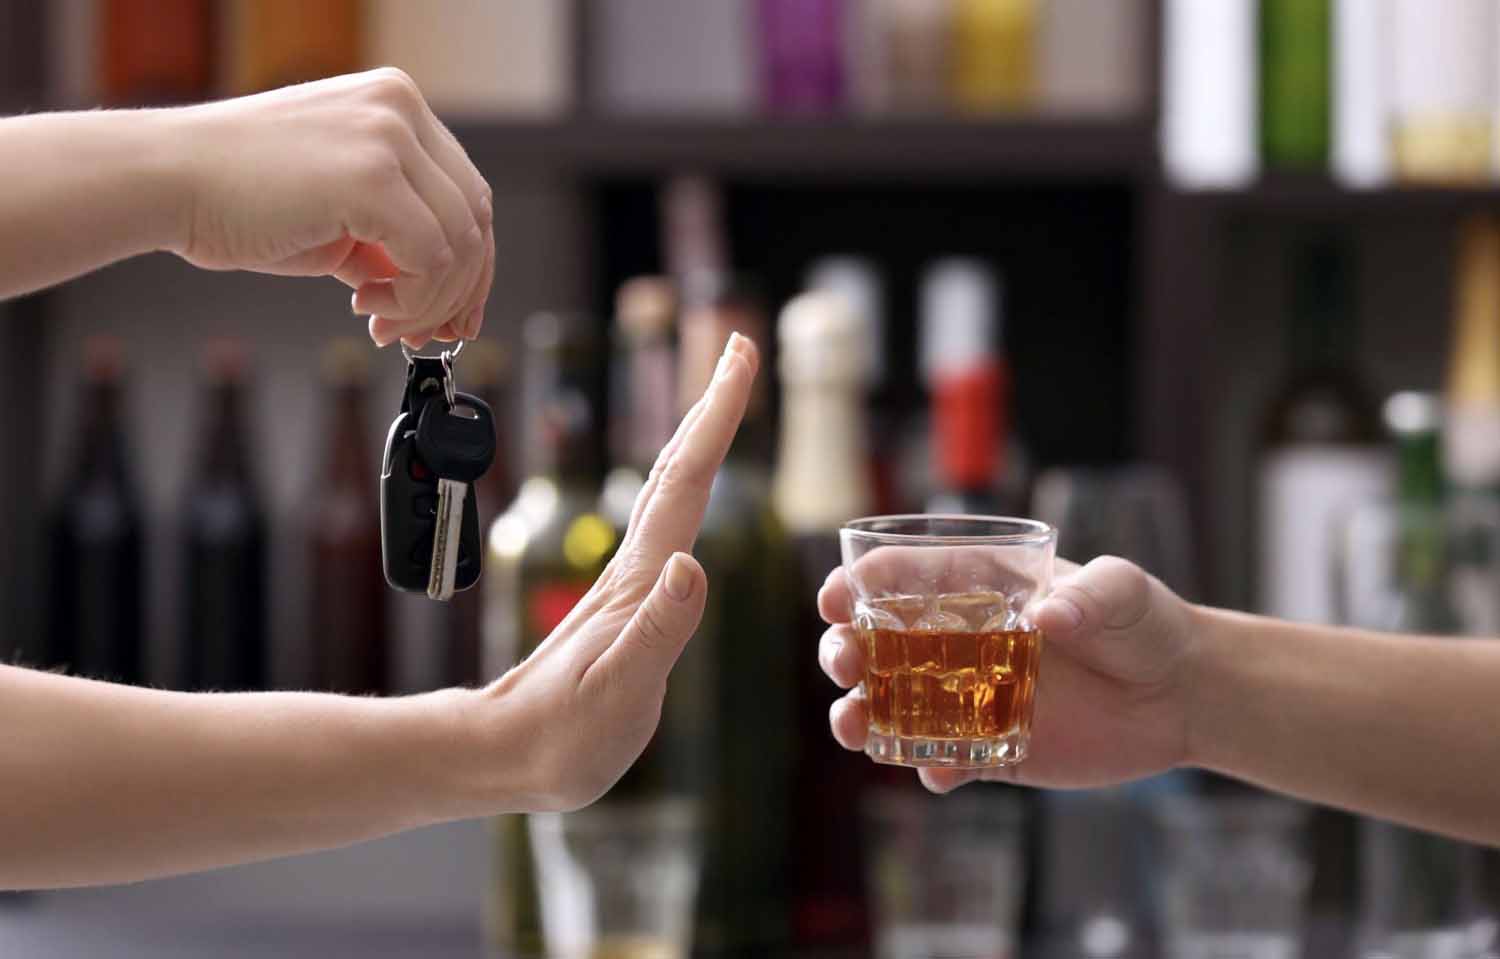 Teen driver with car key refusing an alcoholic beverage.